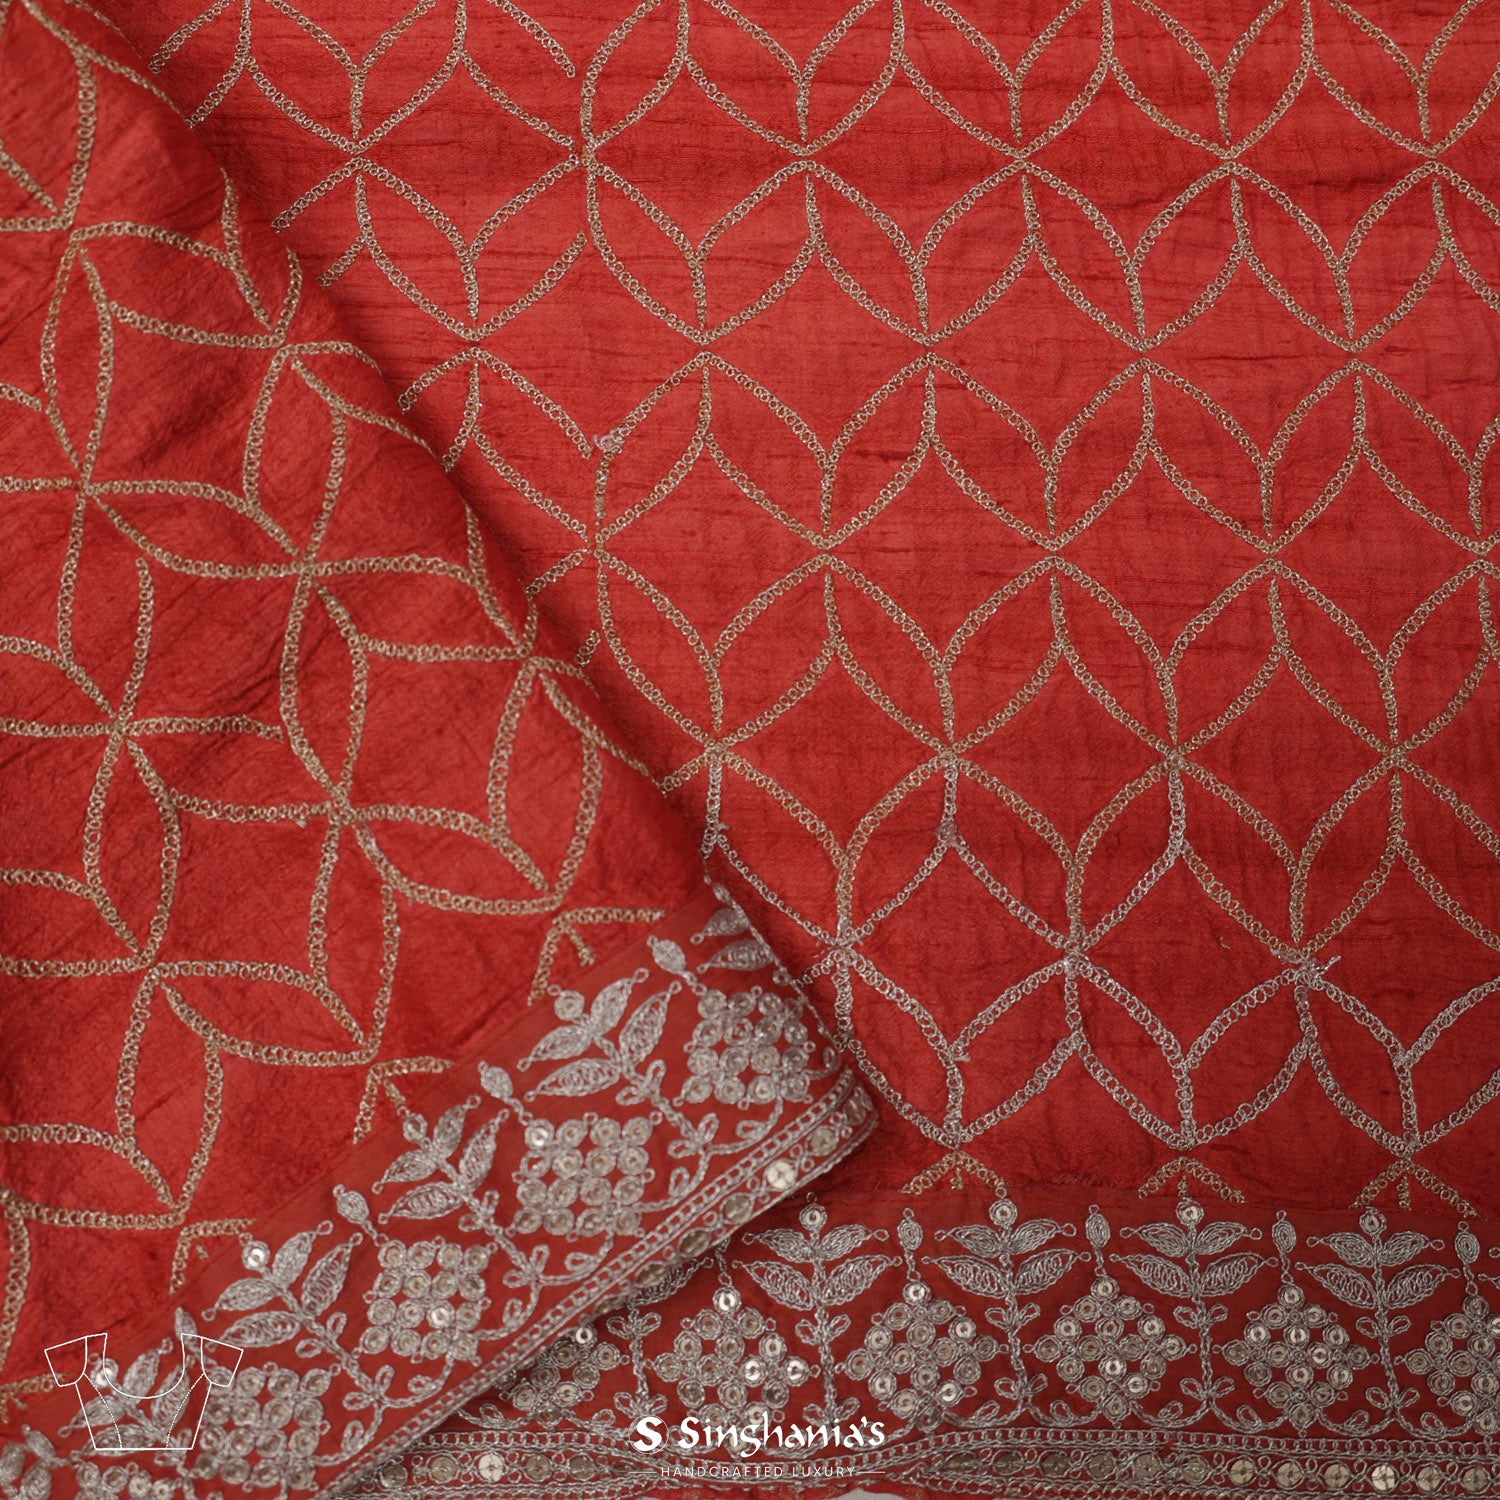 Outrageous Orange Printed Dupion Silk Saree With Floral Pattern